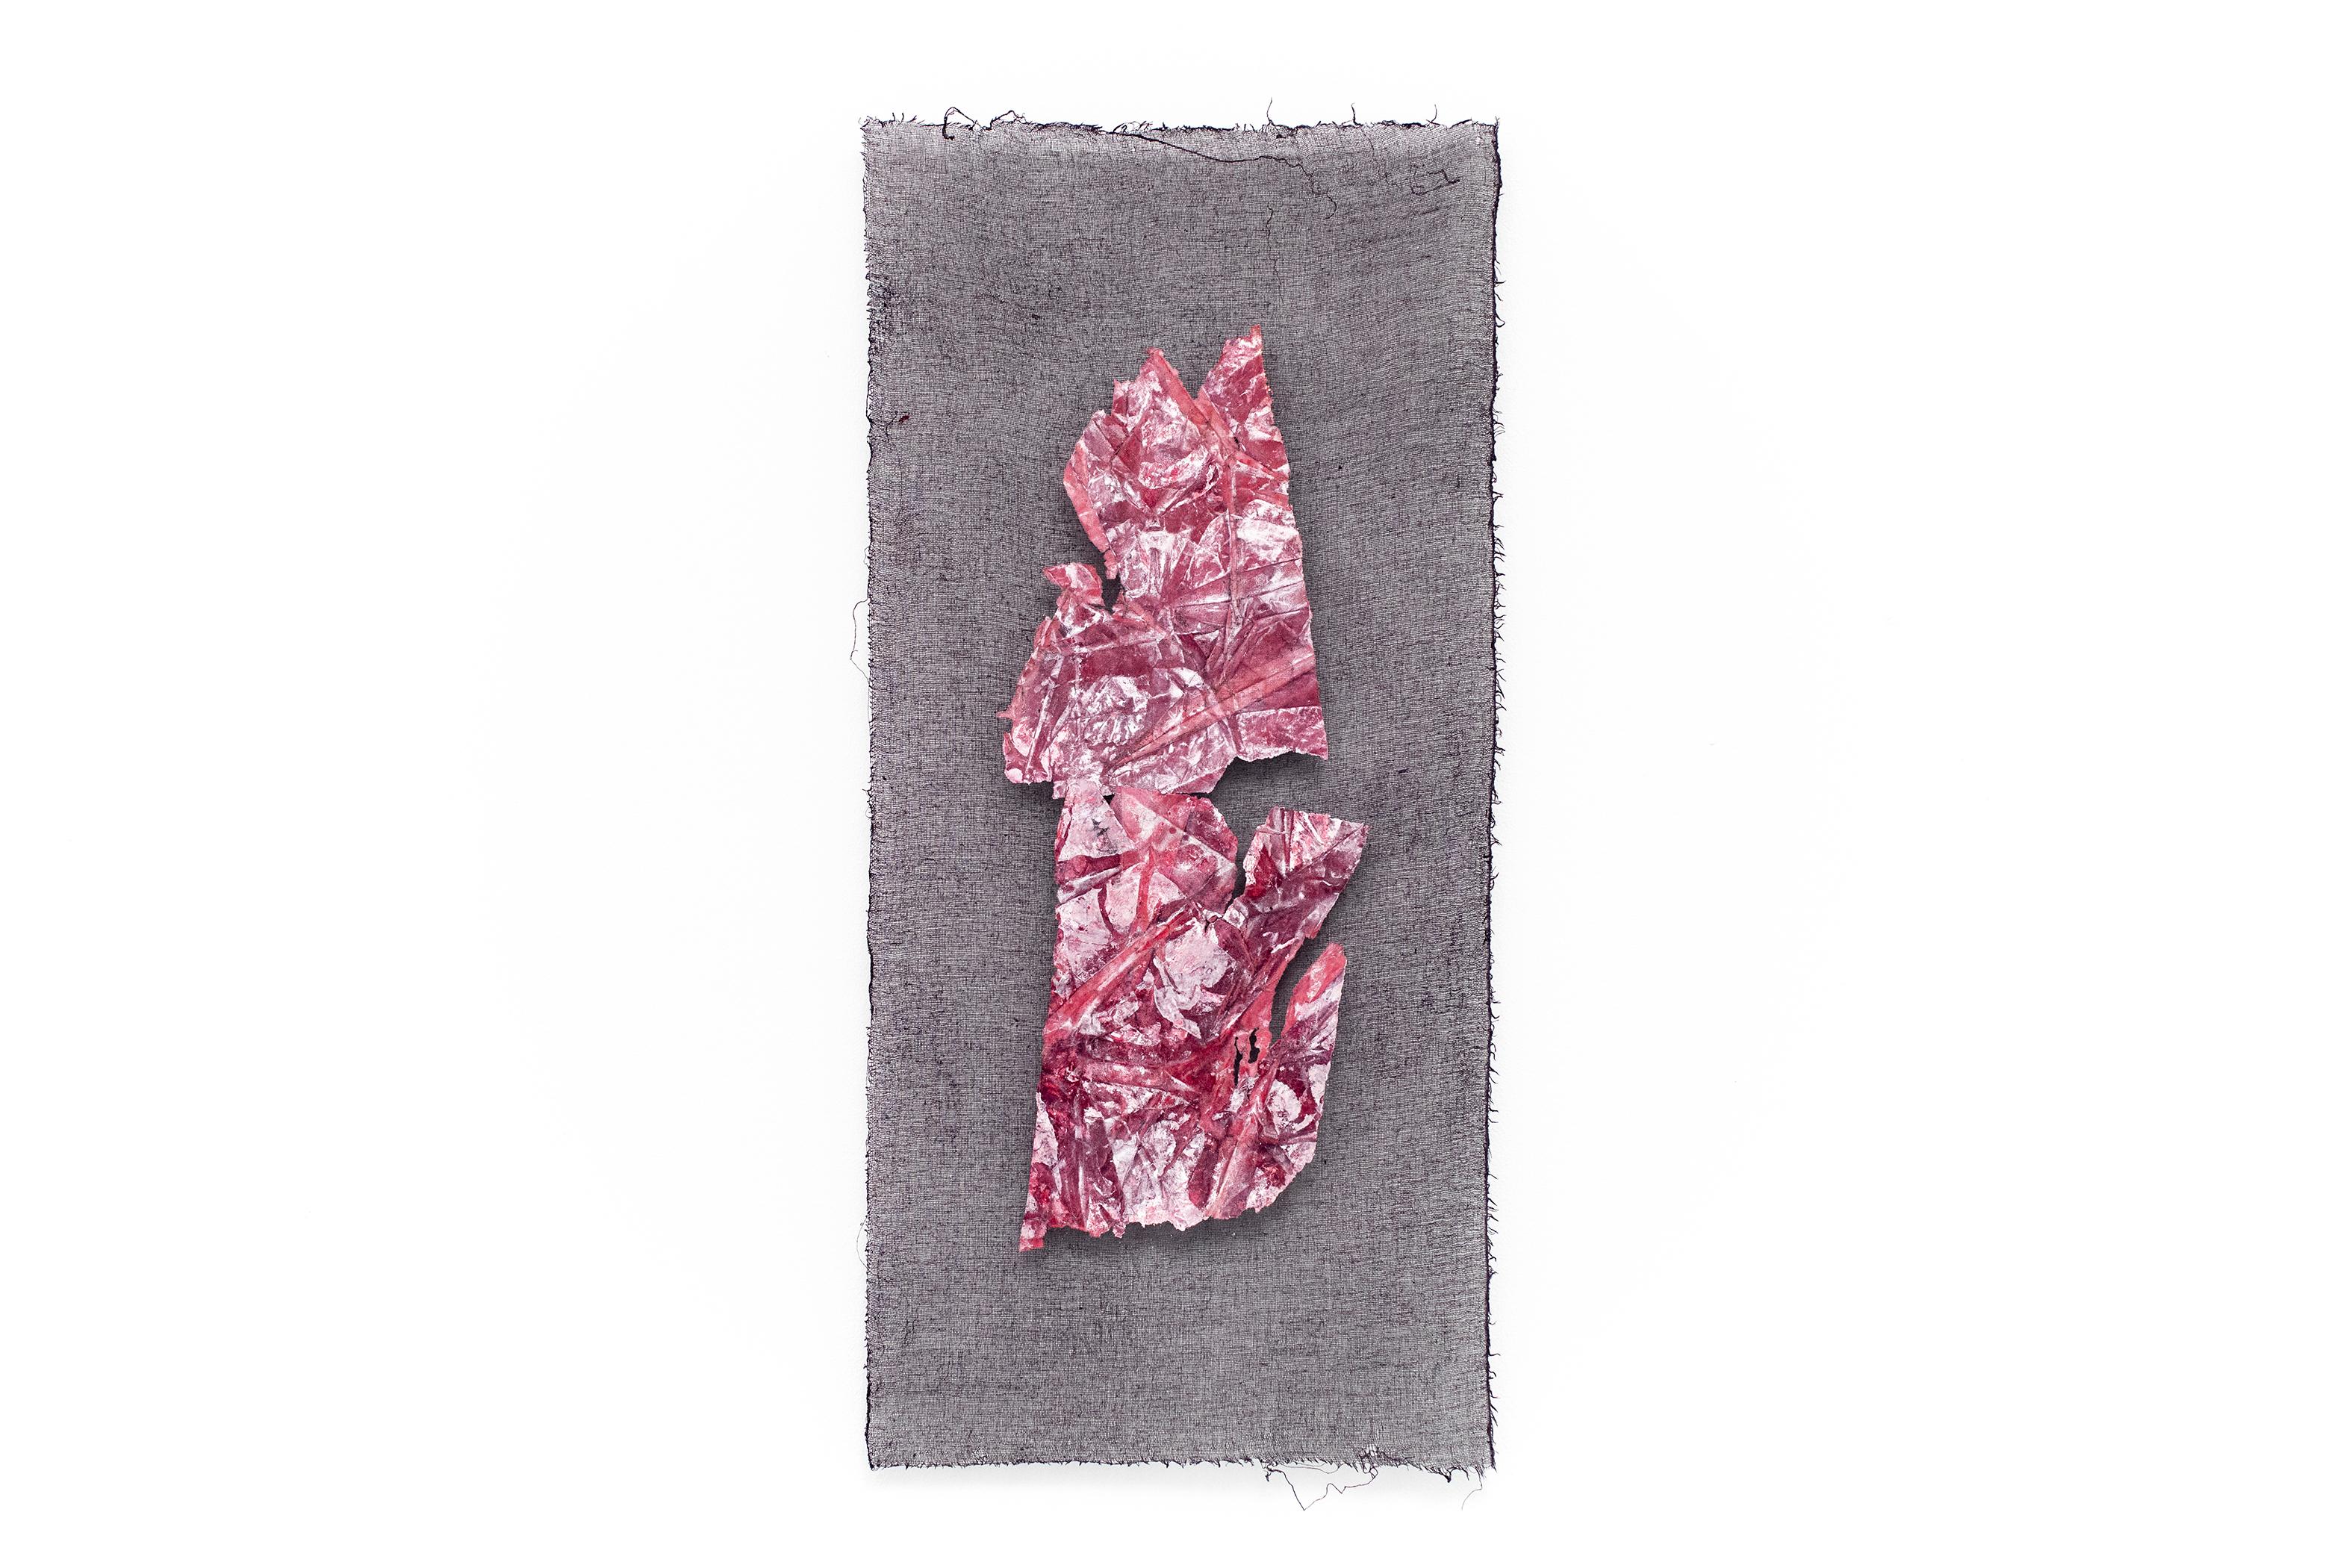 Flesh, Mulberry paper and acrylic on gauze